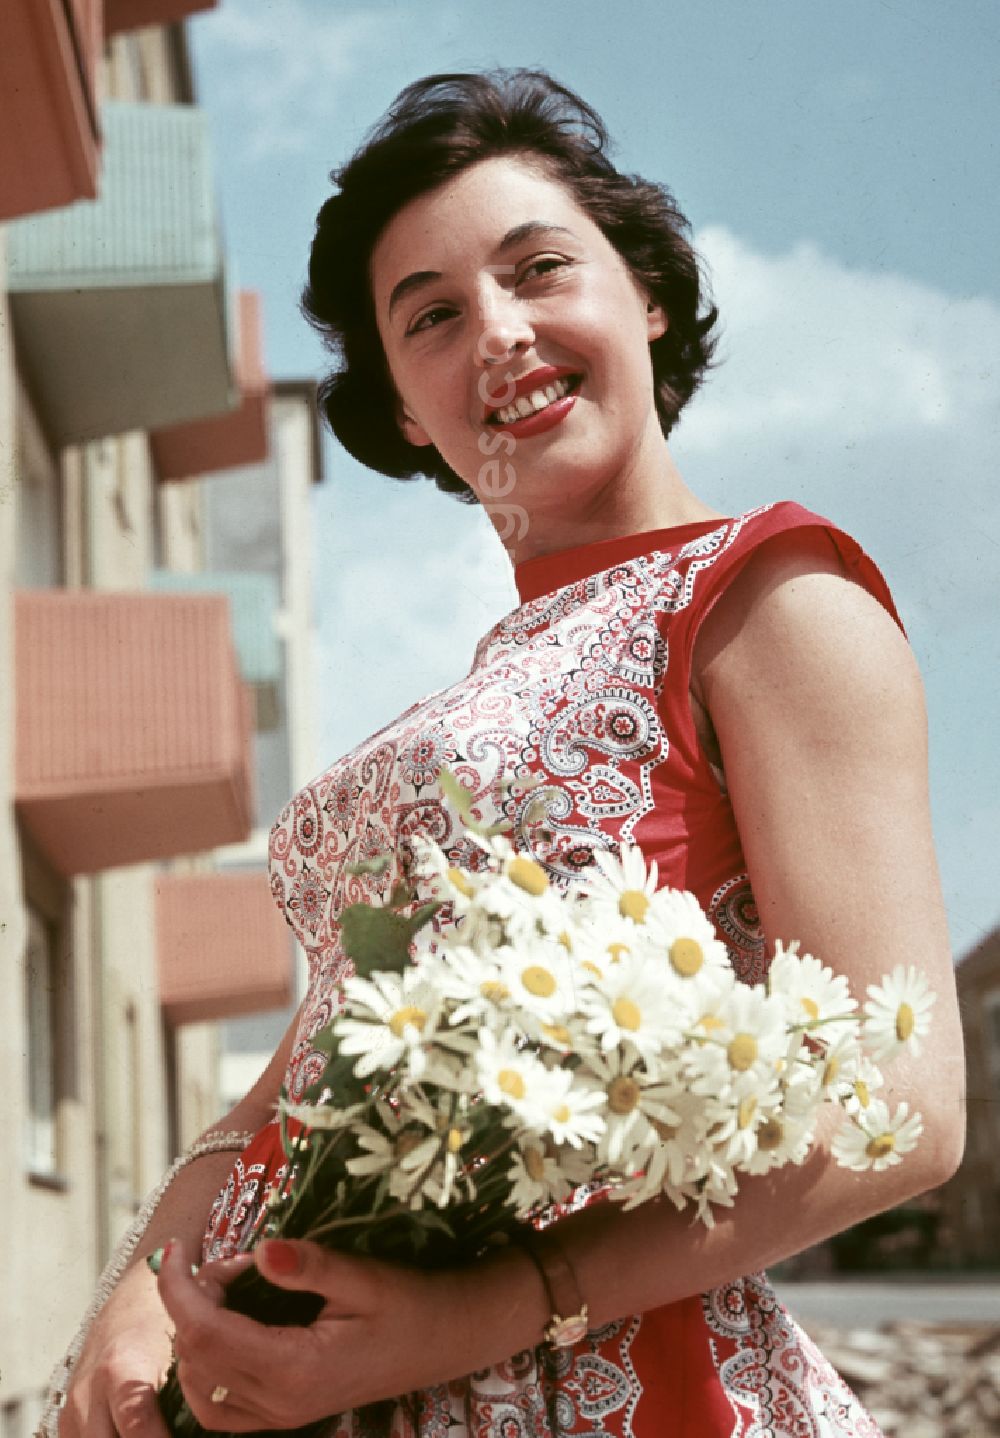 GDR image archive: Coswig - A young woman poses with flowers in front of a newly built block of flats in Coswig, Saxony in the territory of the former GDR, German Democratic Republic